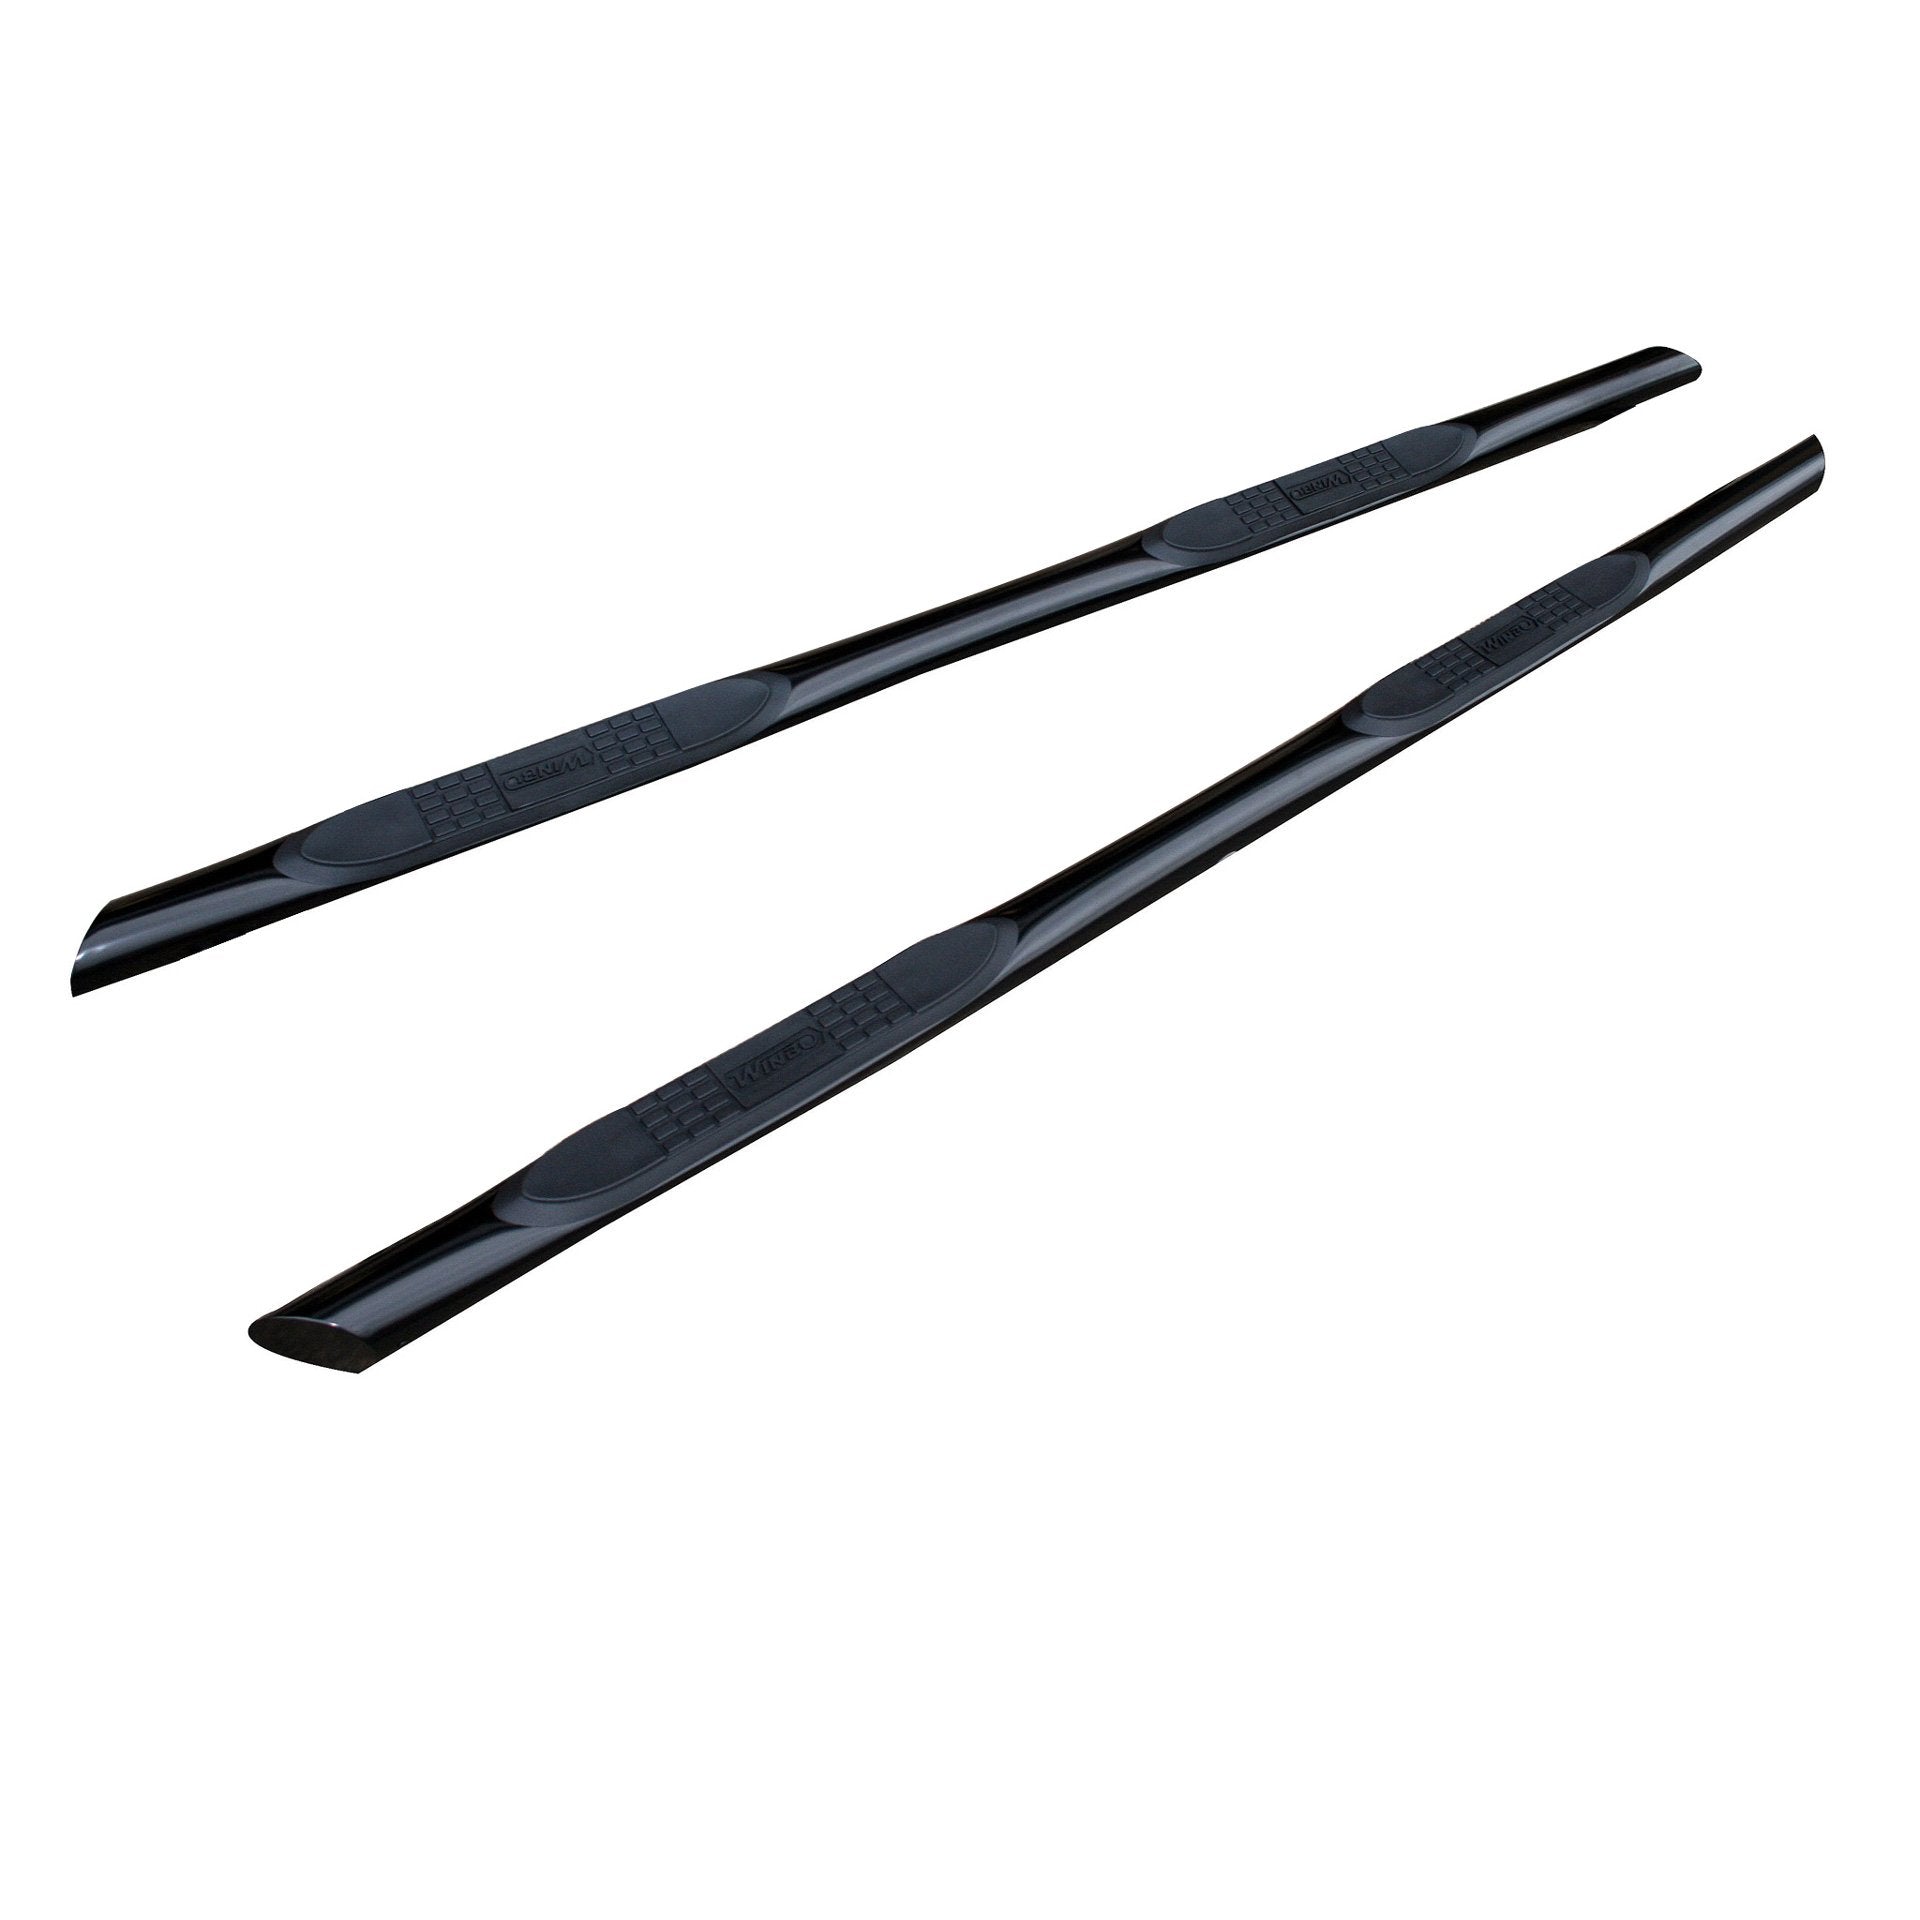 Black Powder Coated Steel Side Bars with Pads for Volkswagen Transporter T5 SWB -  - sold by Direct4x4